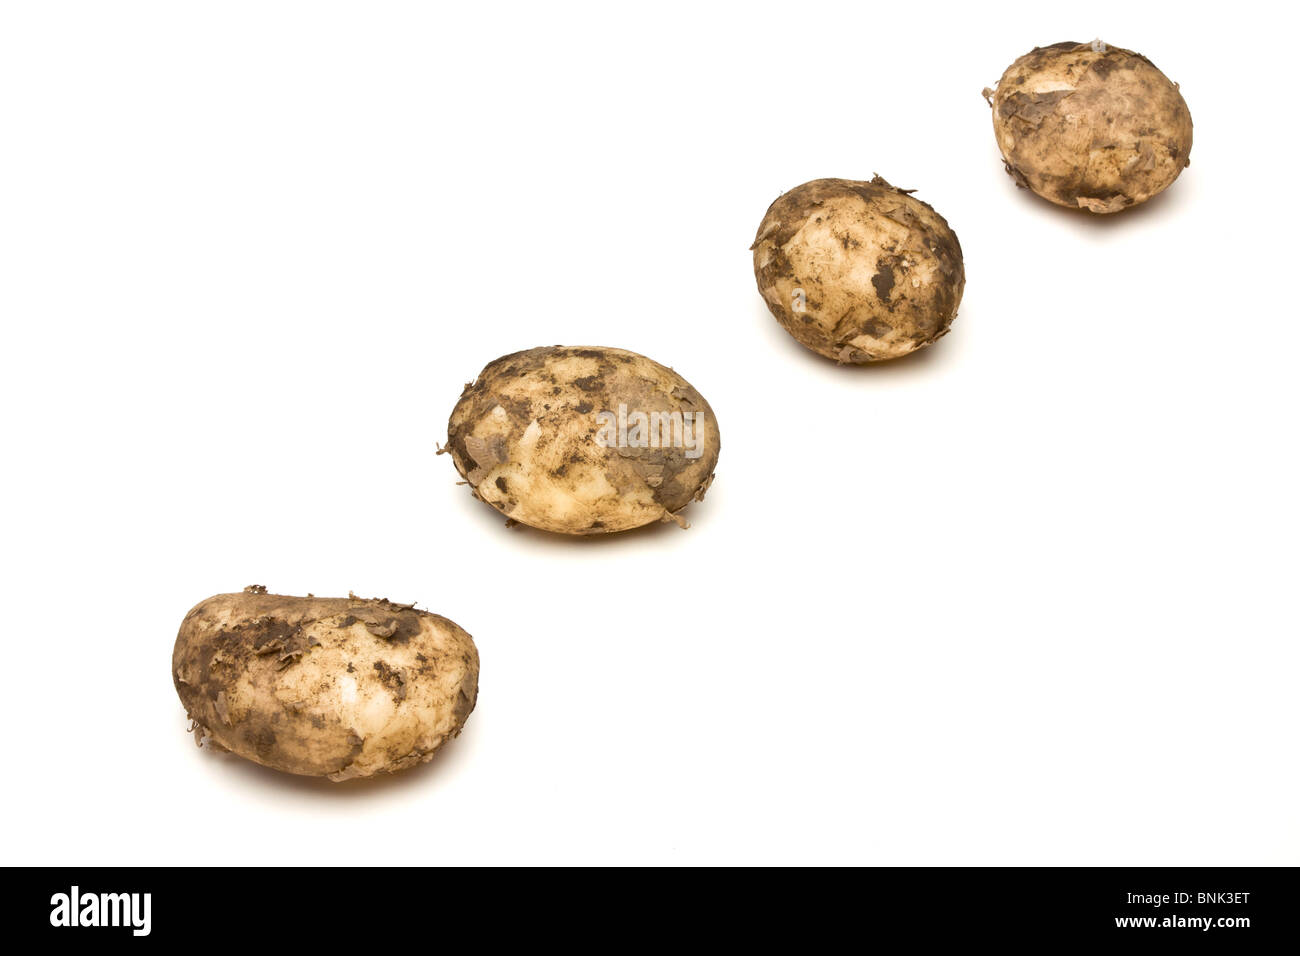 Lincoln new Potatoes from low perspective isolated against white background. Stock Photo